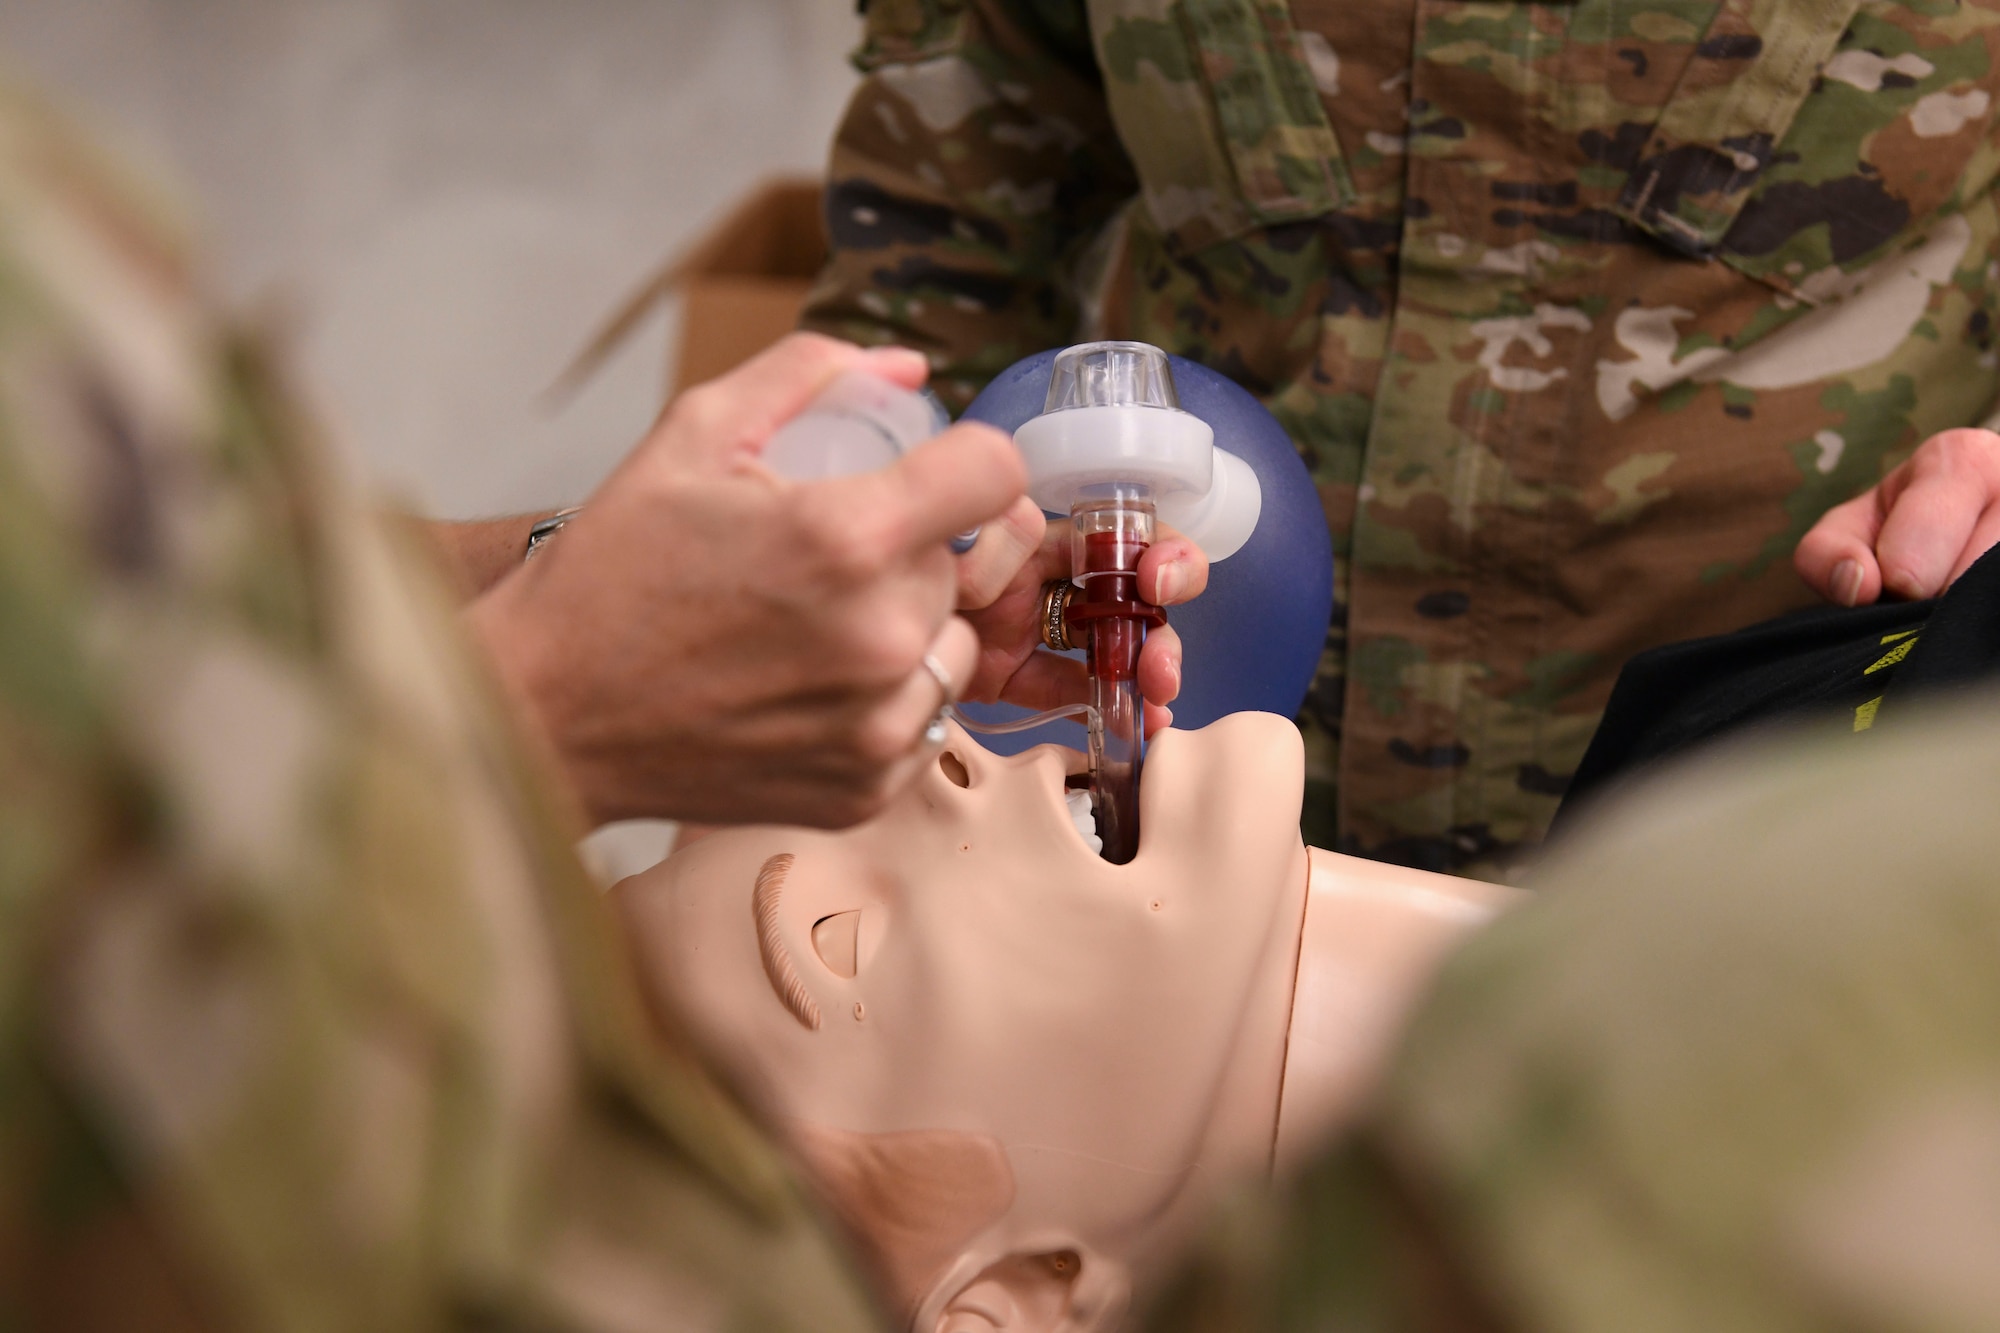 U.S. Air Force Airmen practice placing an airway adjunct device used in emergency field treatment on a training mannequin